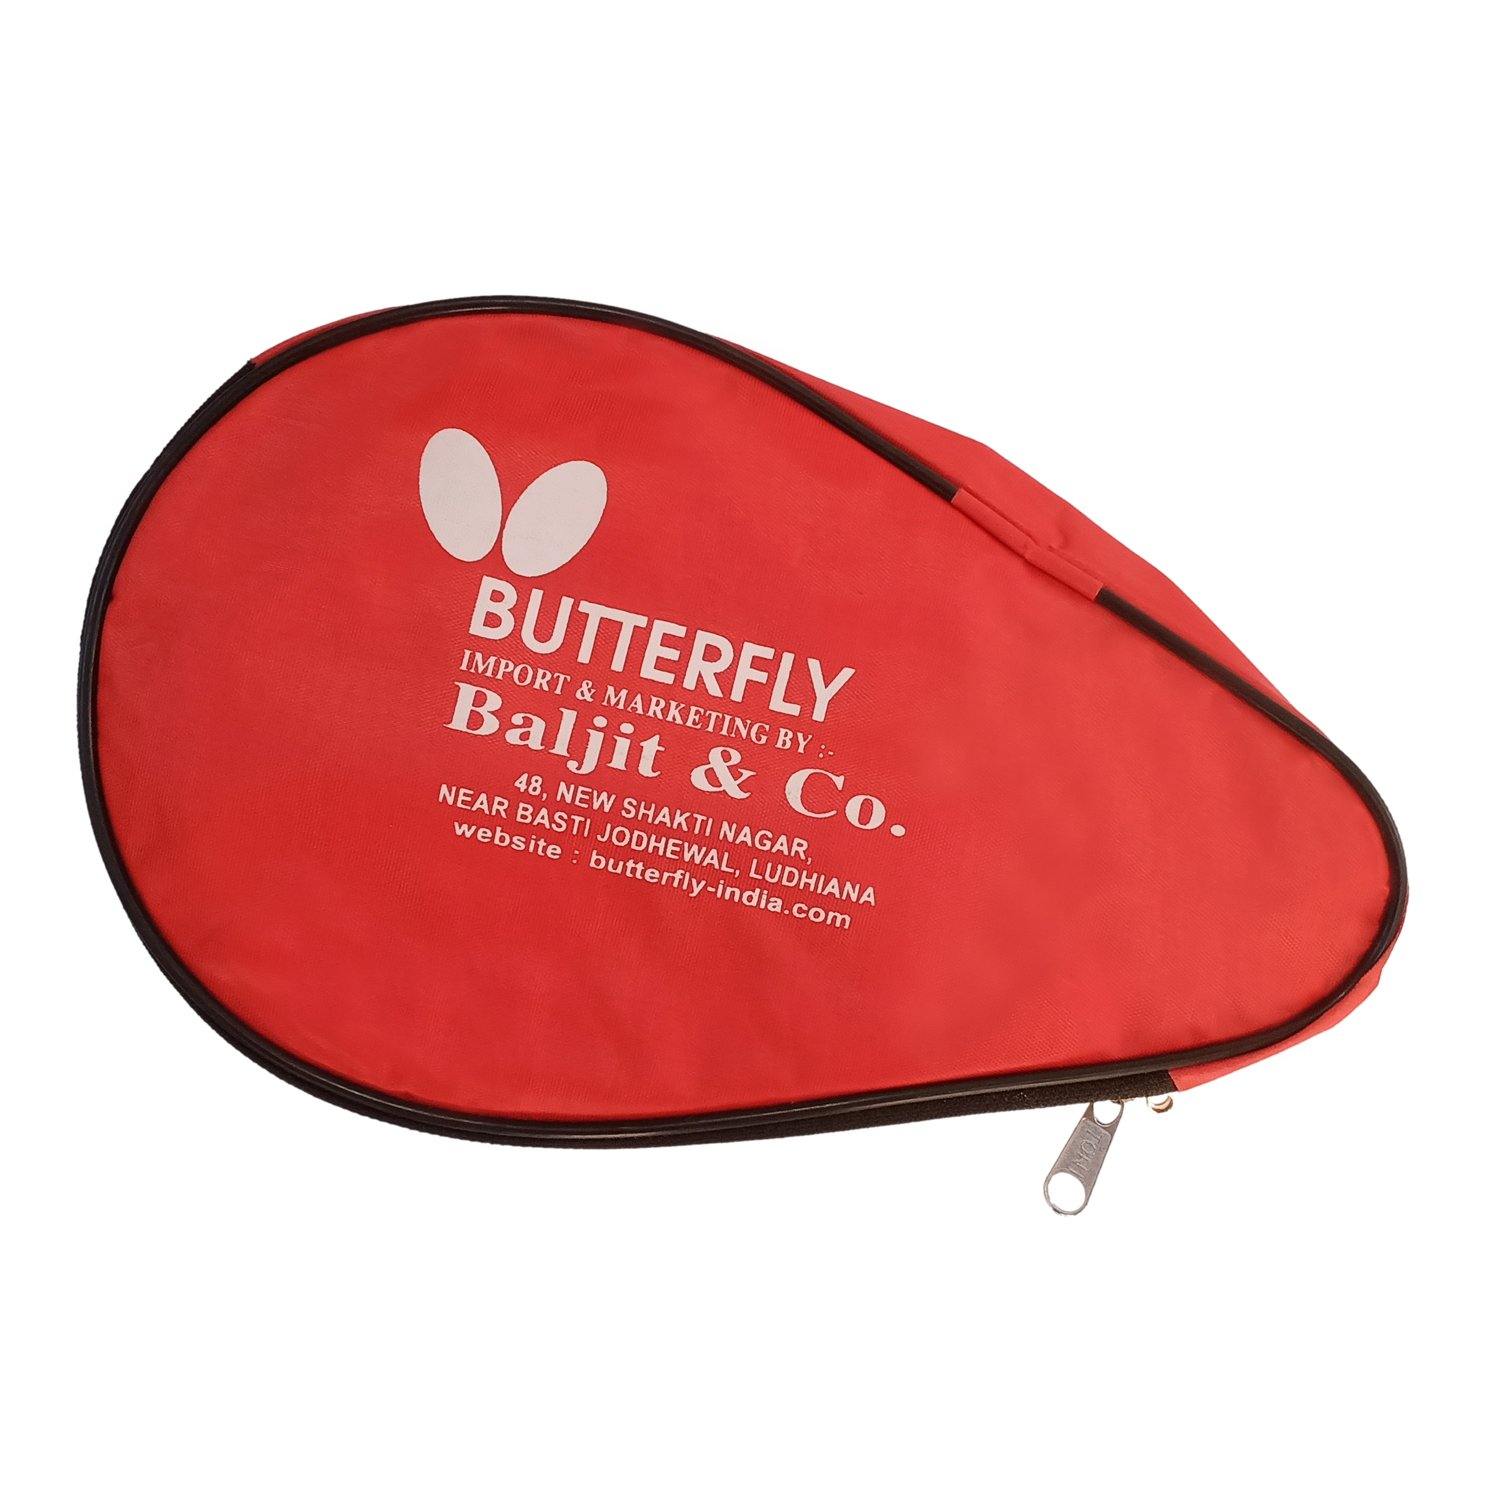 Butterfly Table Tennis Bat Cover - Red (Single) - Best Price online Prokicksports.com